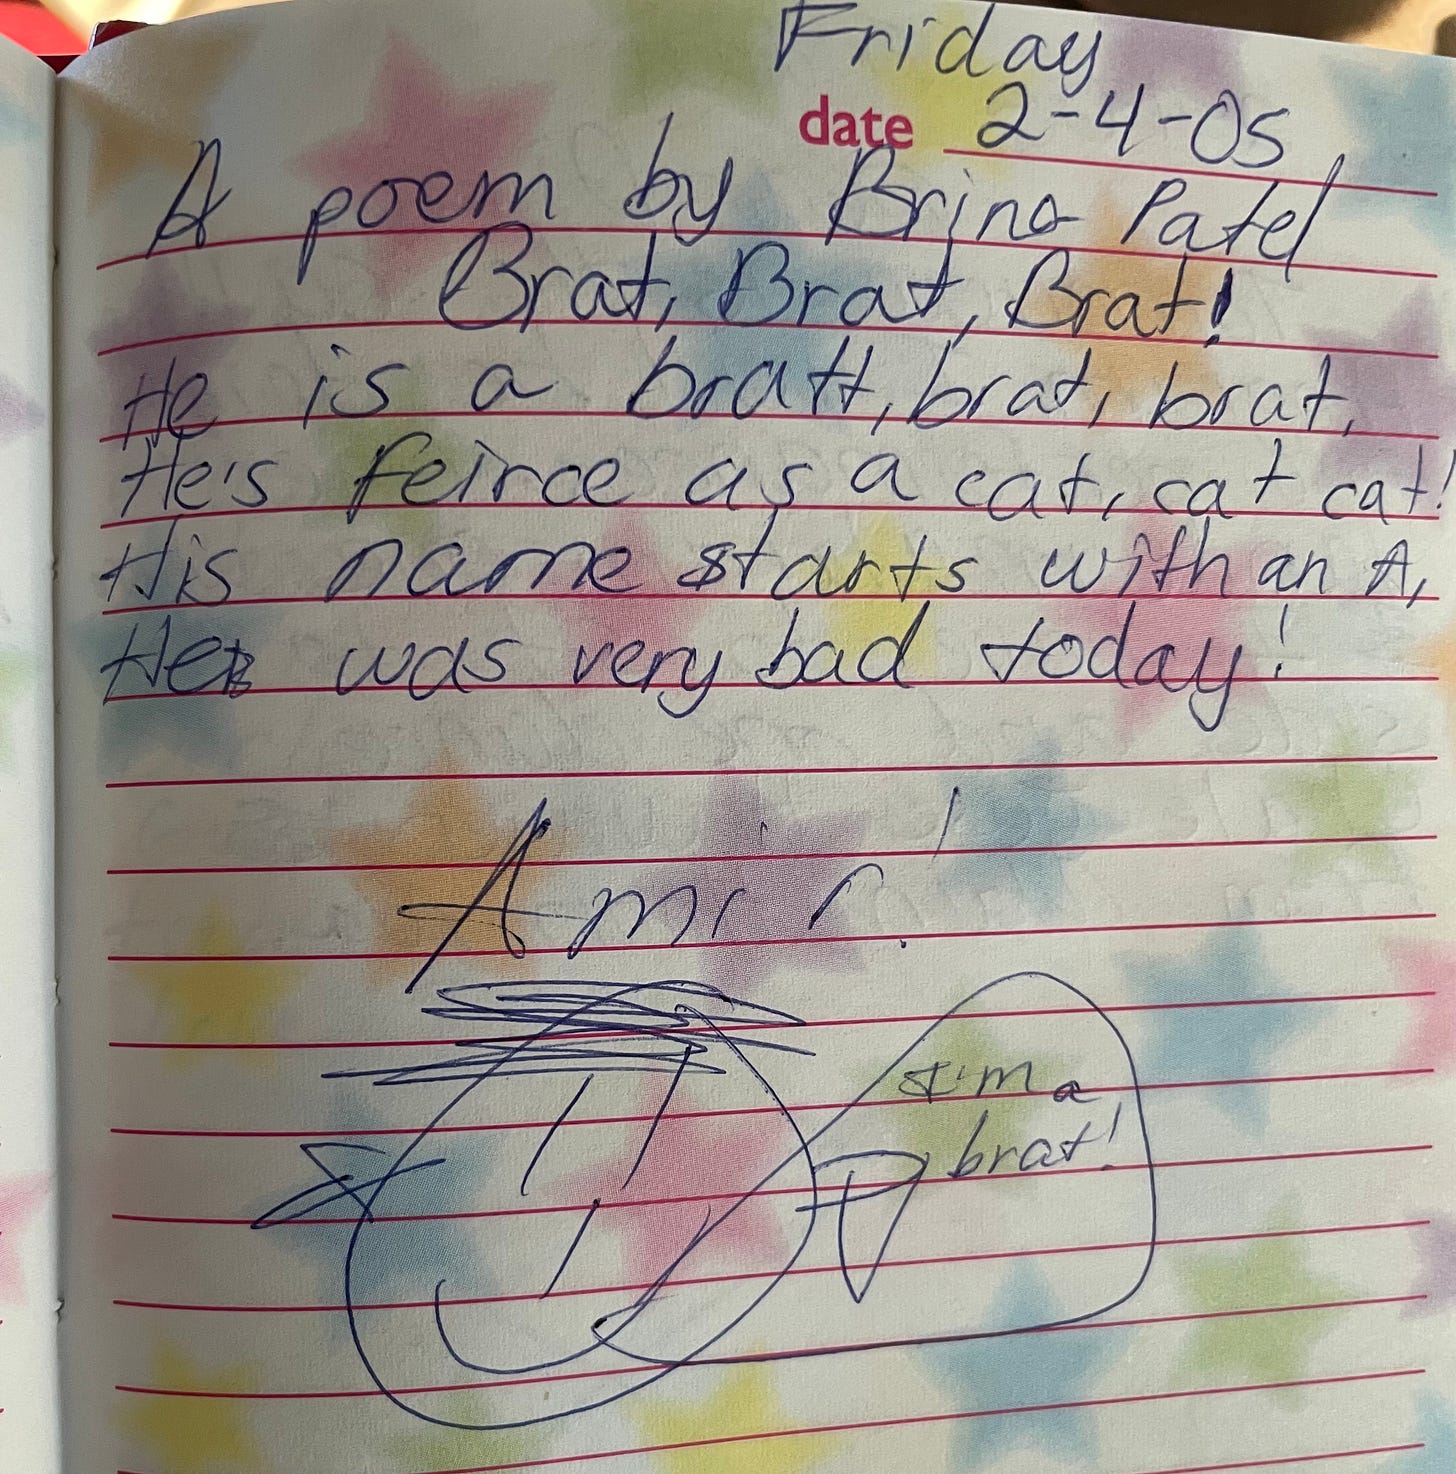 A poem written in blue ink and on white lined paper with faded colorful stars in the background. Includes a sketch of a boy labeled "Amir" with a speech bubble that says, "I'm a brat!"